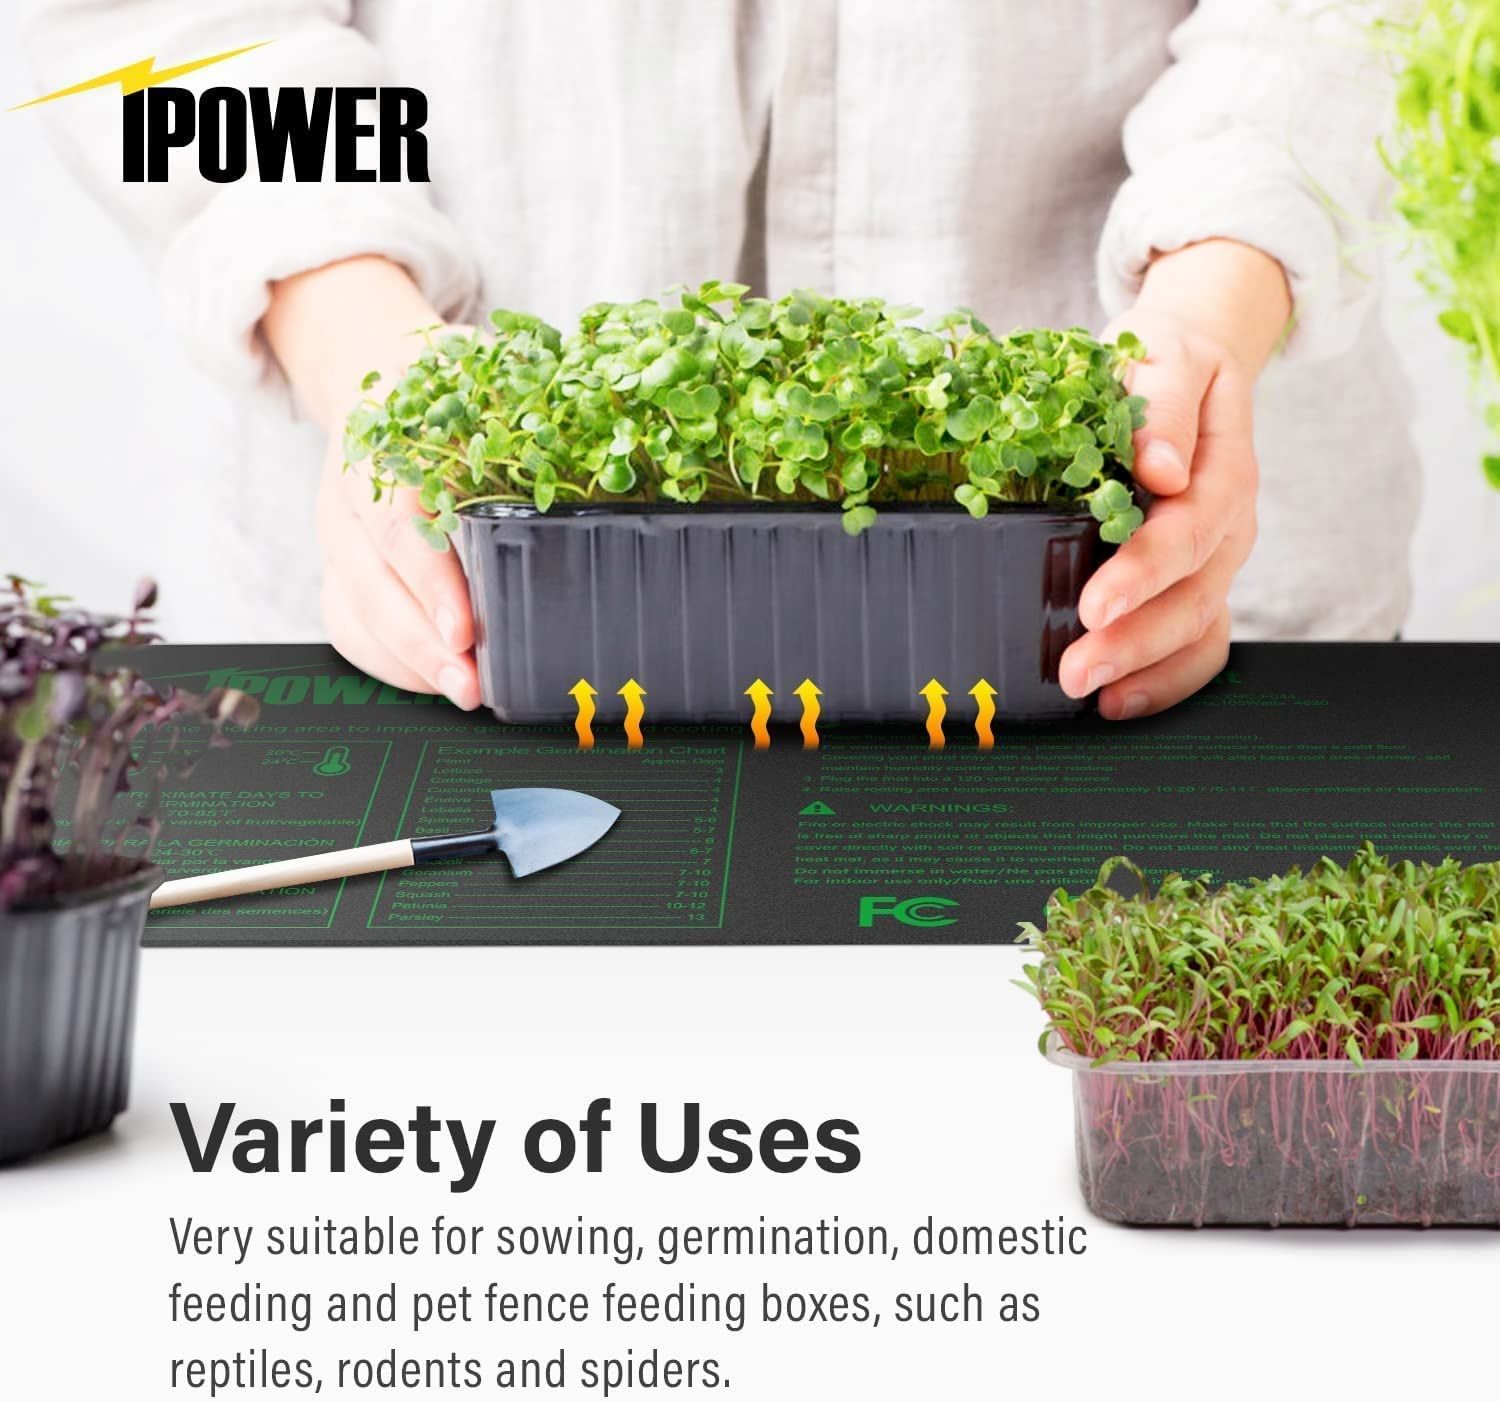 the ipower seeding heat mat warming a plant tray with seedlings